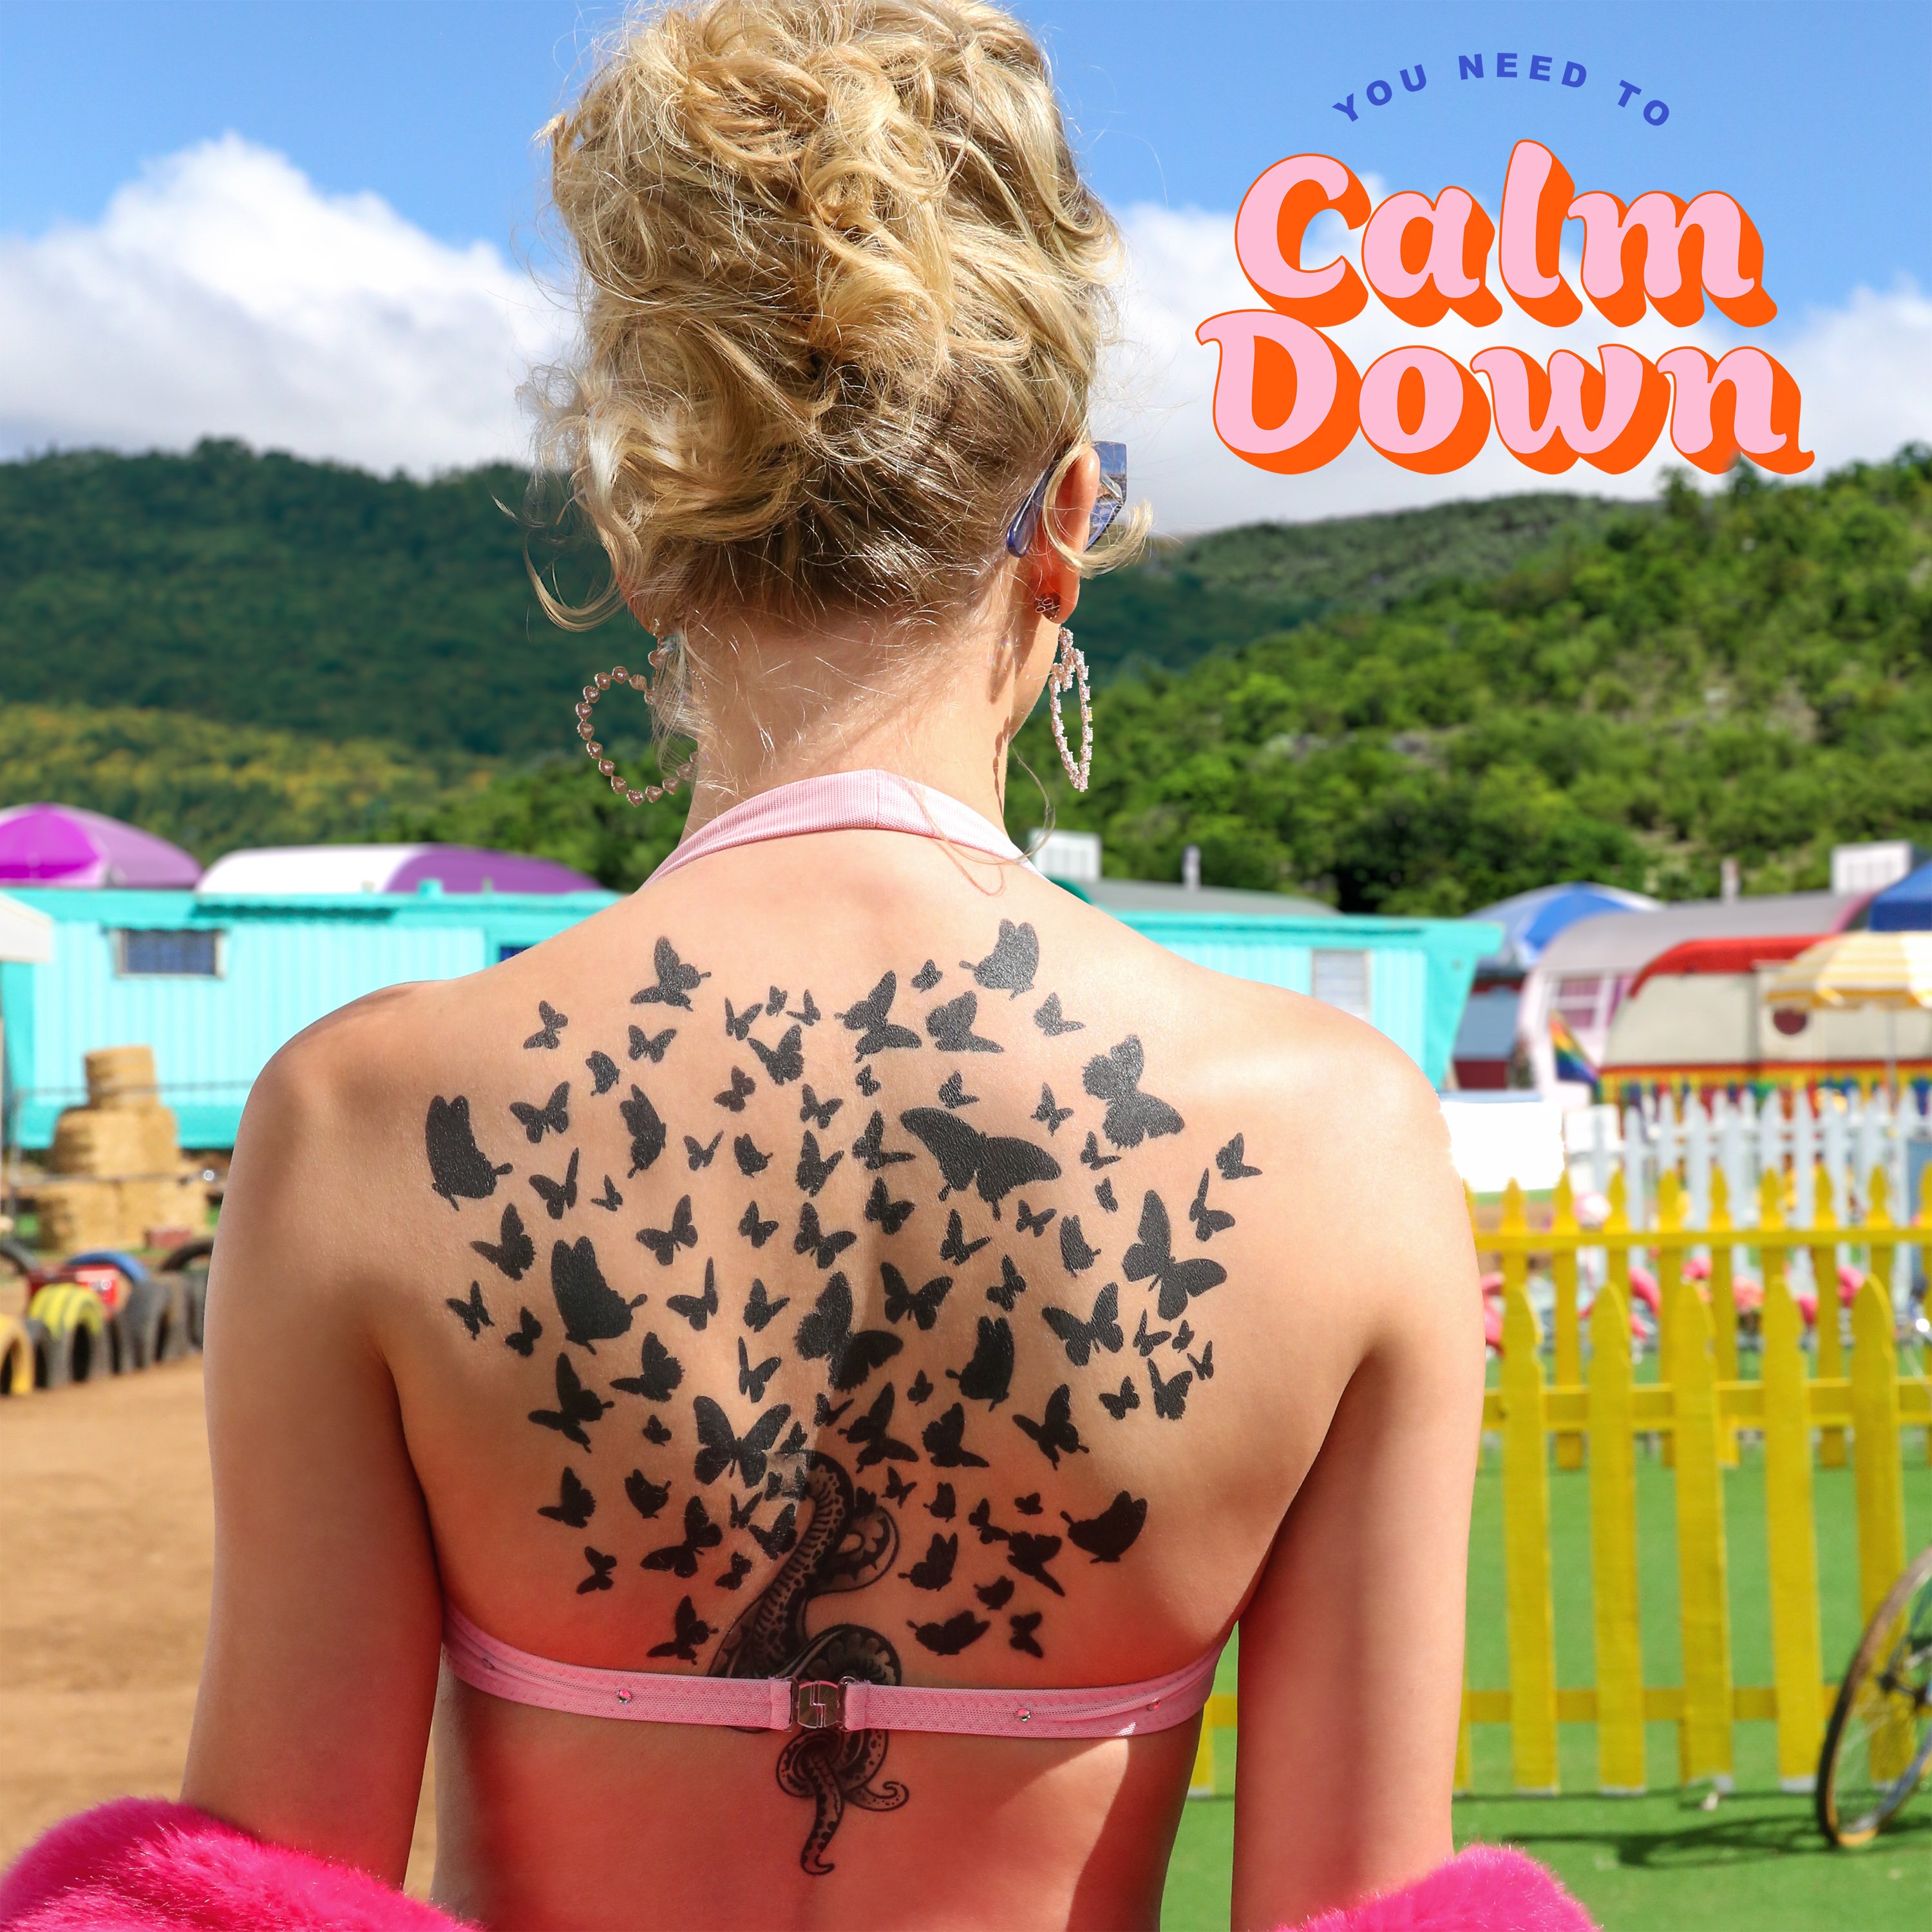 Taylor Swift — You Need To Calm Down cover artwork